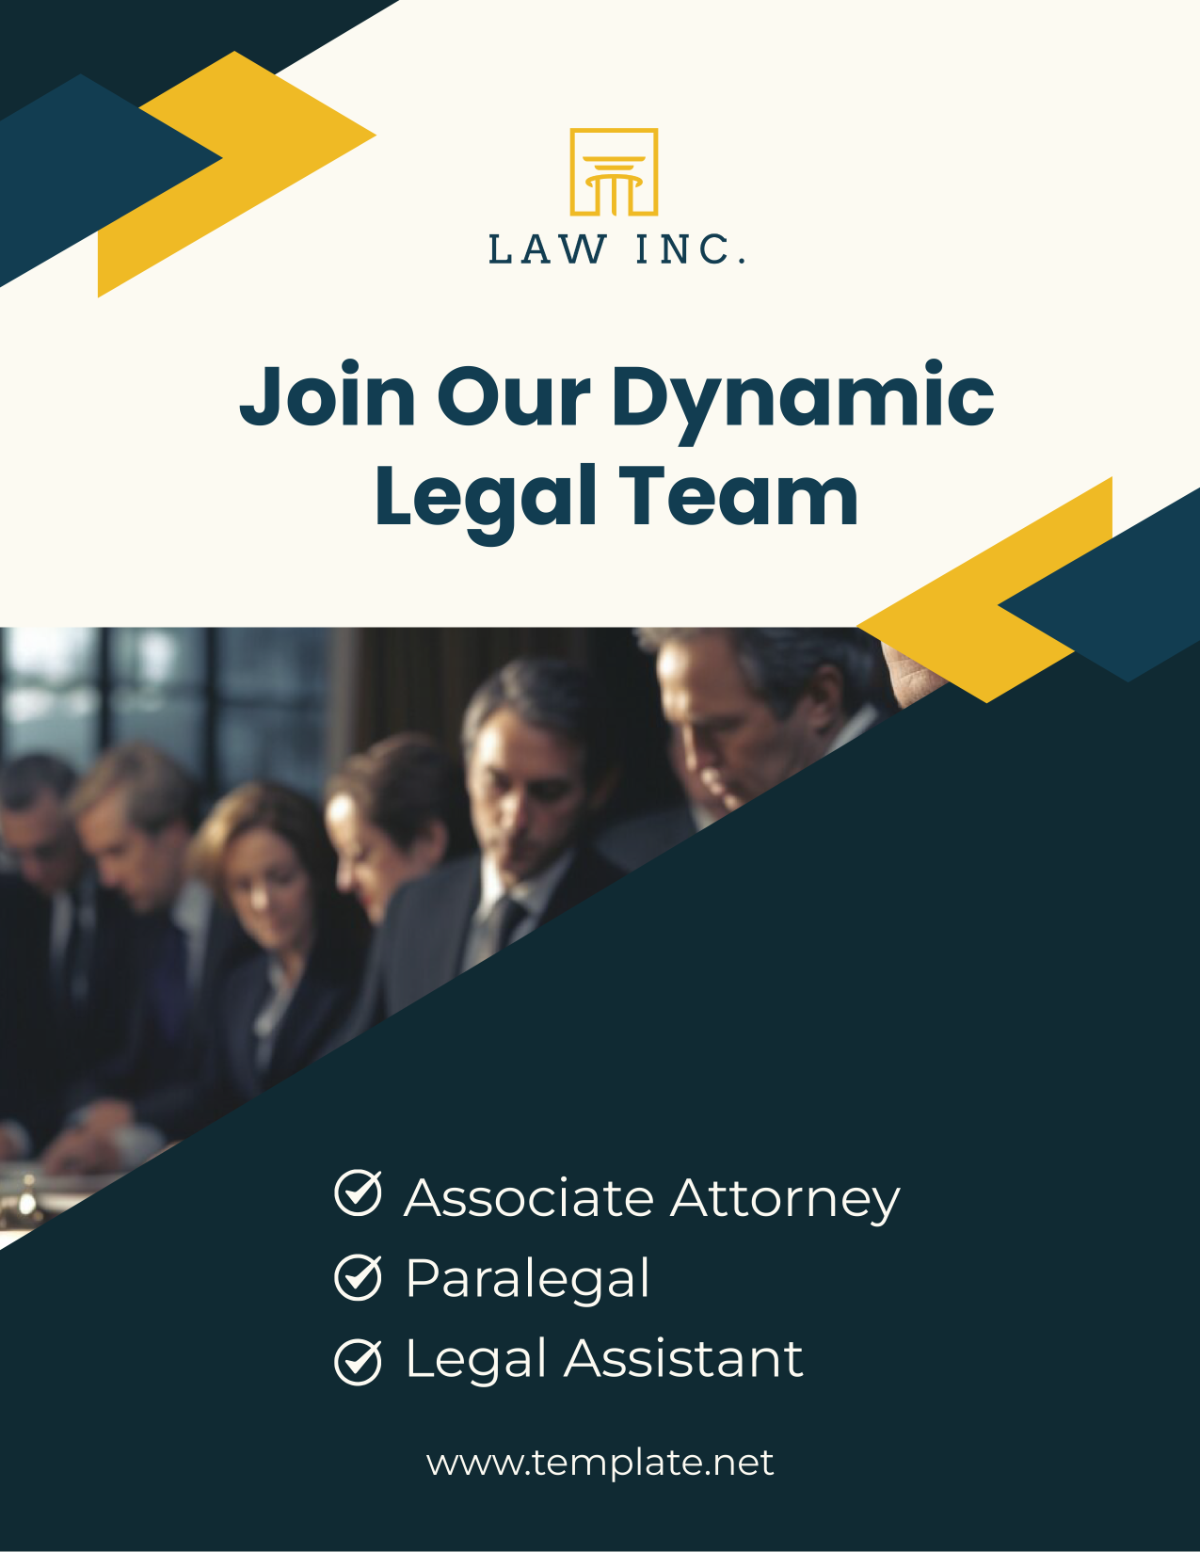 Law Firm Recruitment Flyer Template